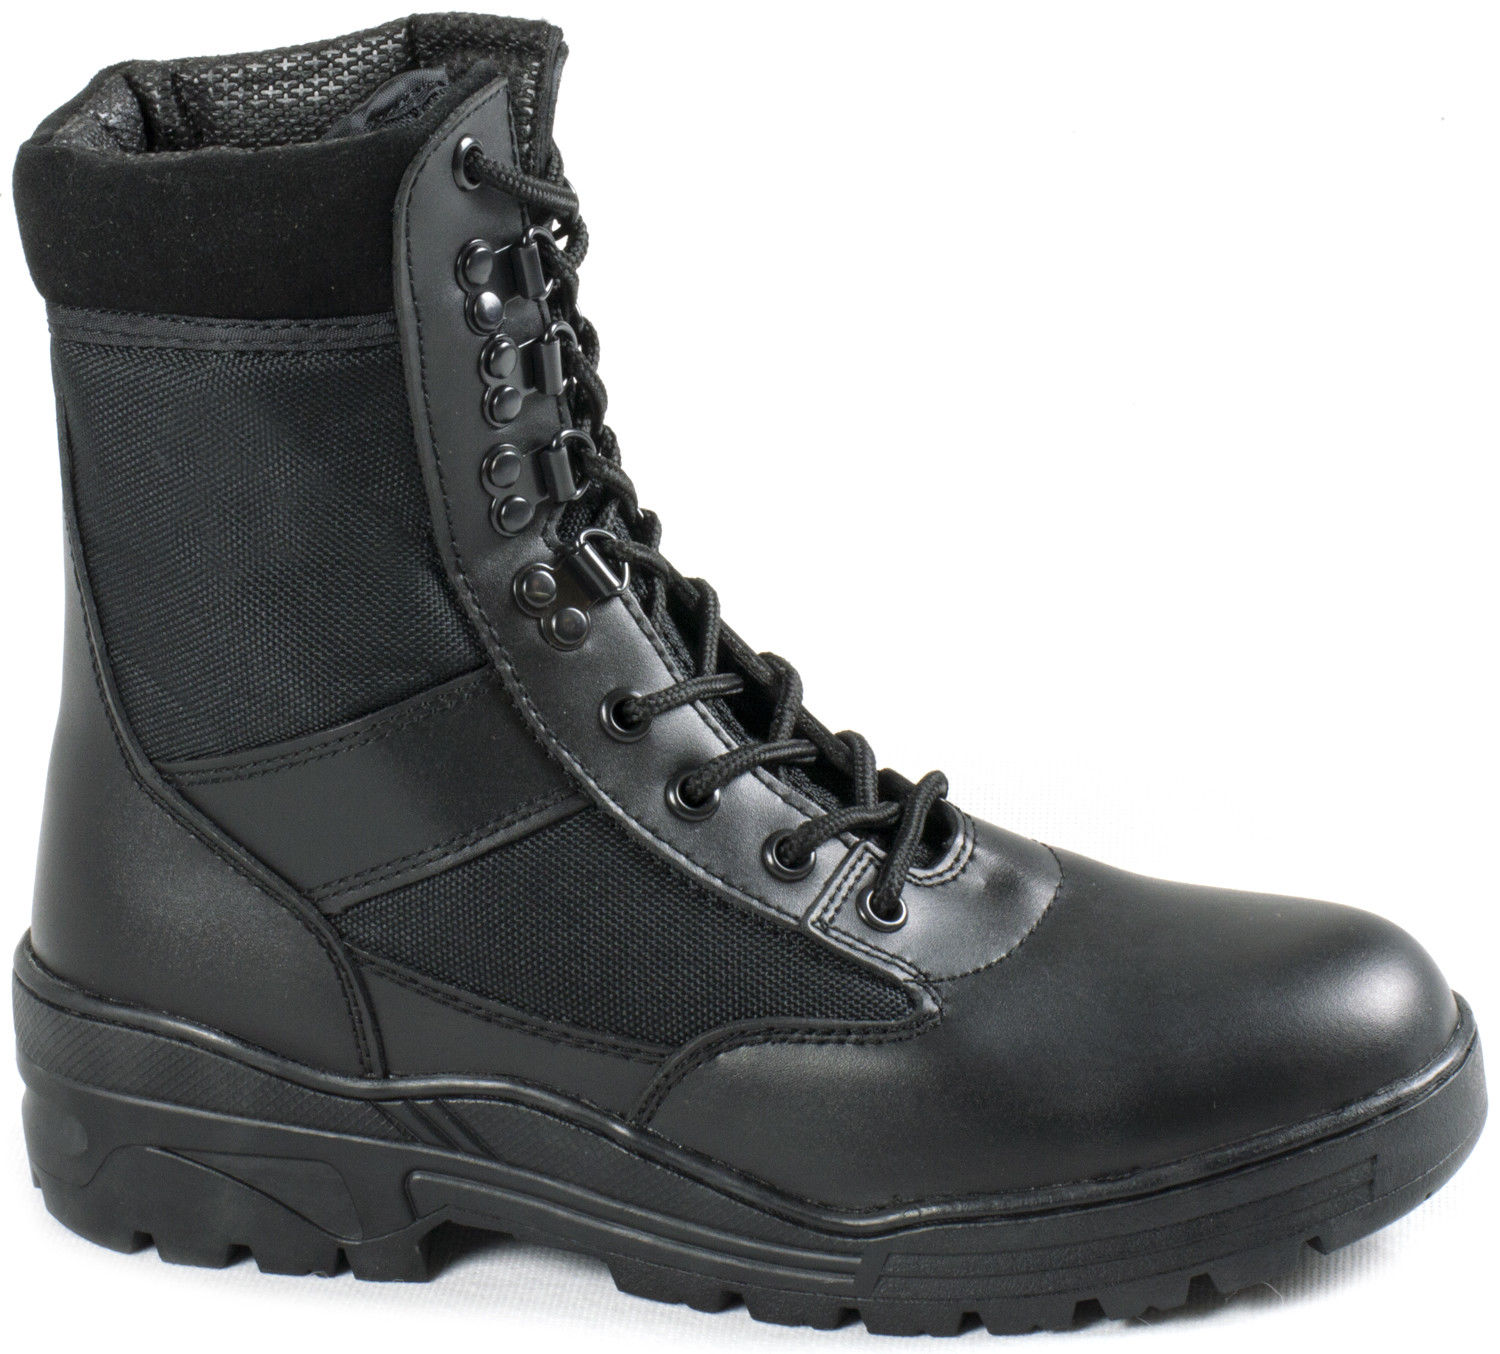 Ebay Army Boots - Army Military